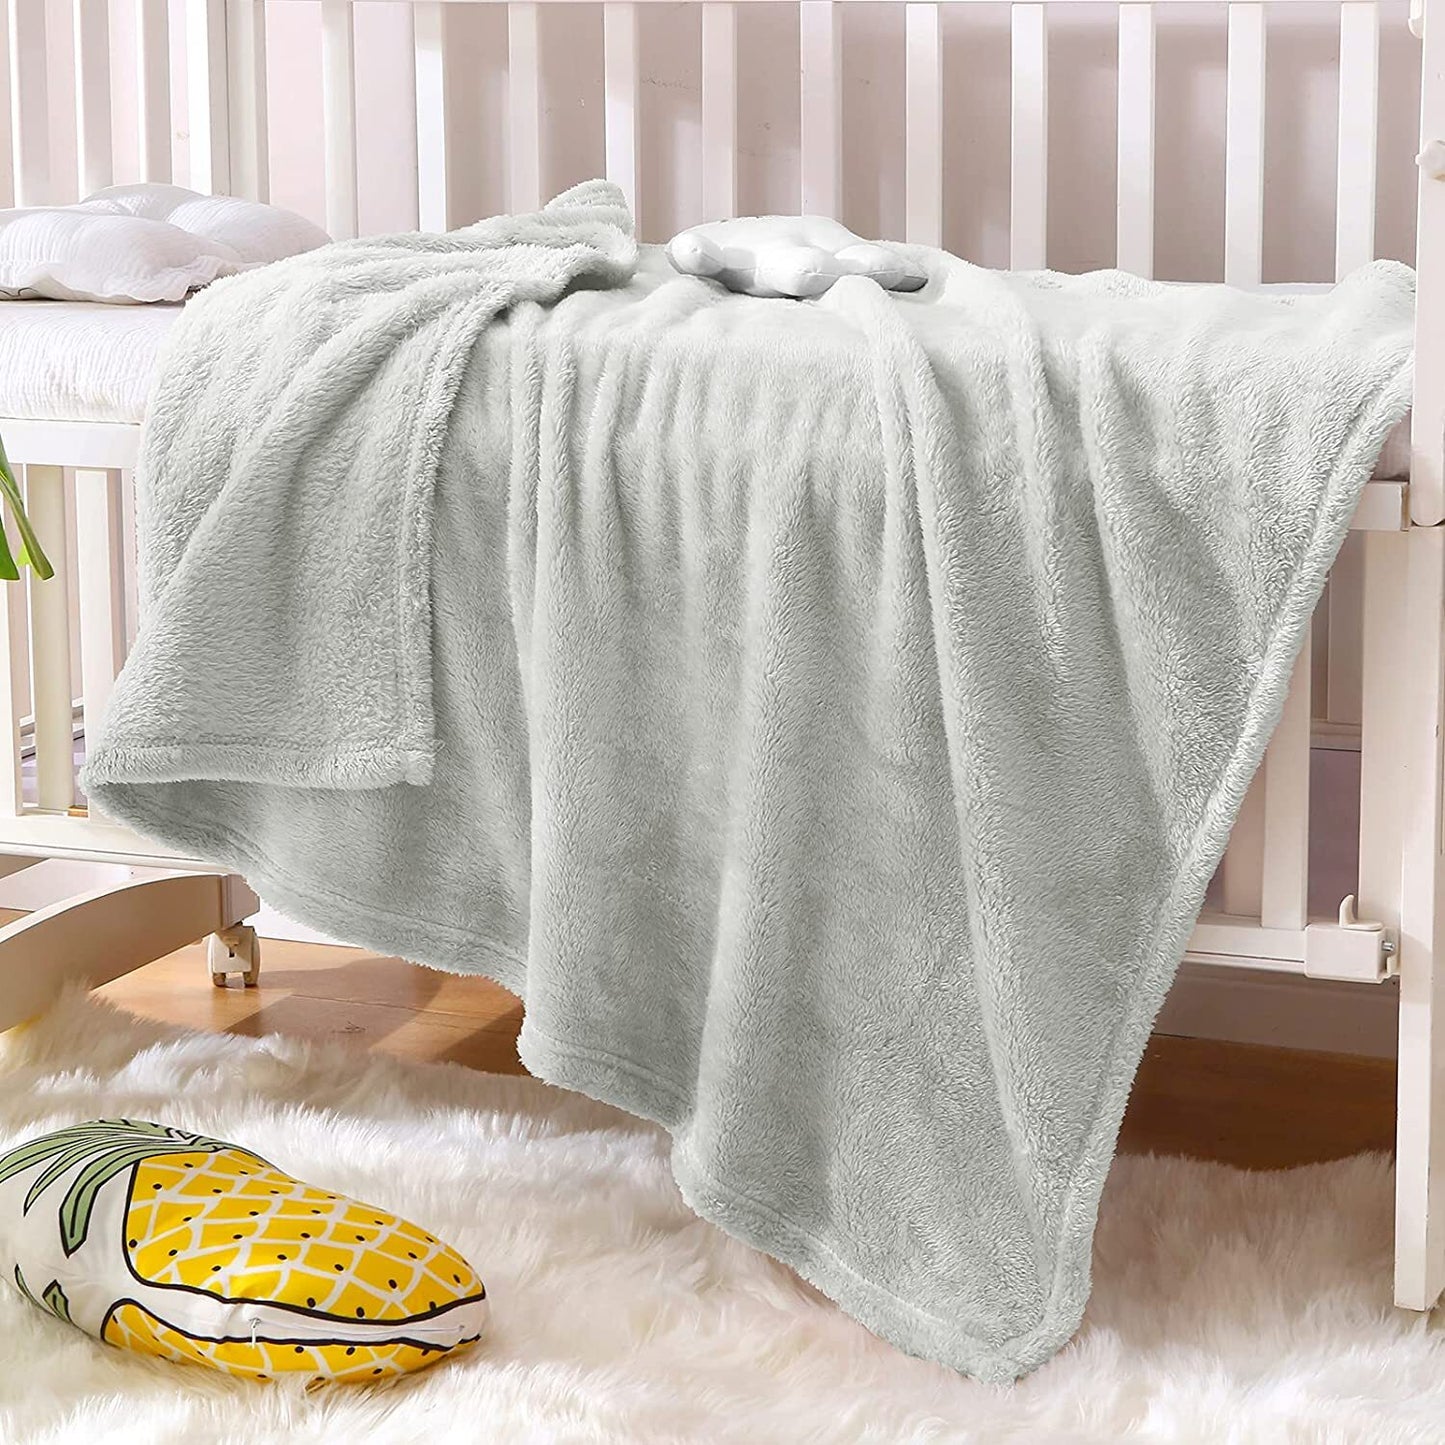 Exclusivo Mezcla Plush Baby Blanket, Soft and Warm Swaddle Throw Blanket, Infant, Newborn, Toddler and Kids Receiving Fleece Blankets for Crib Stroller (40x50 inches, Light Grey)